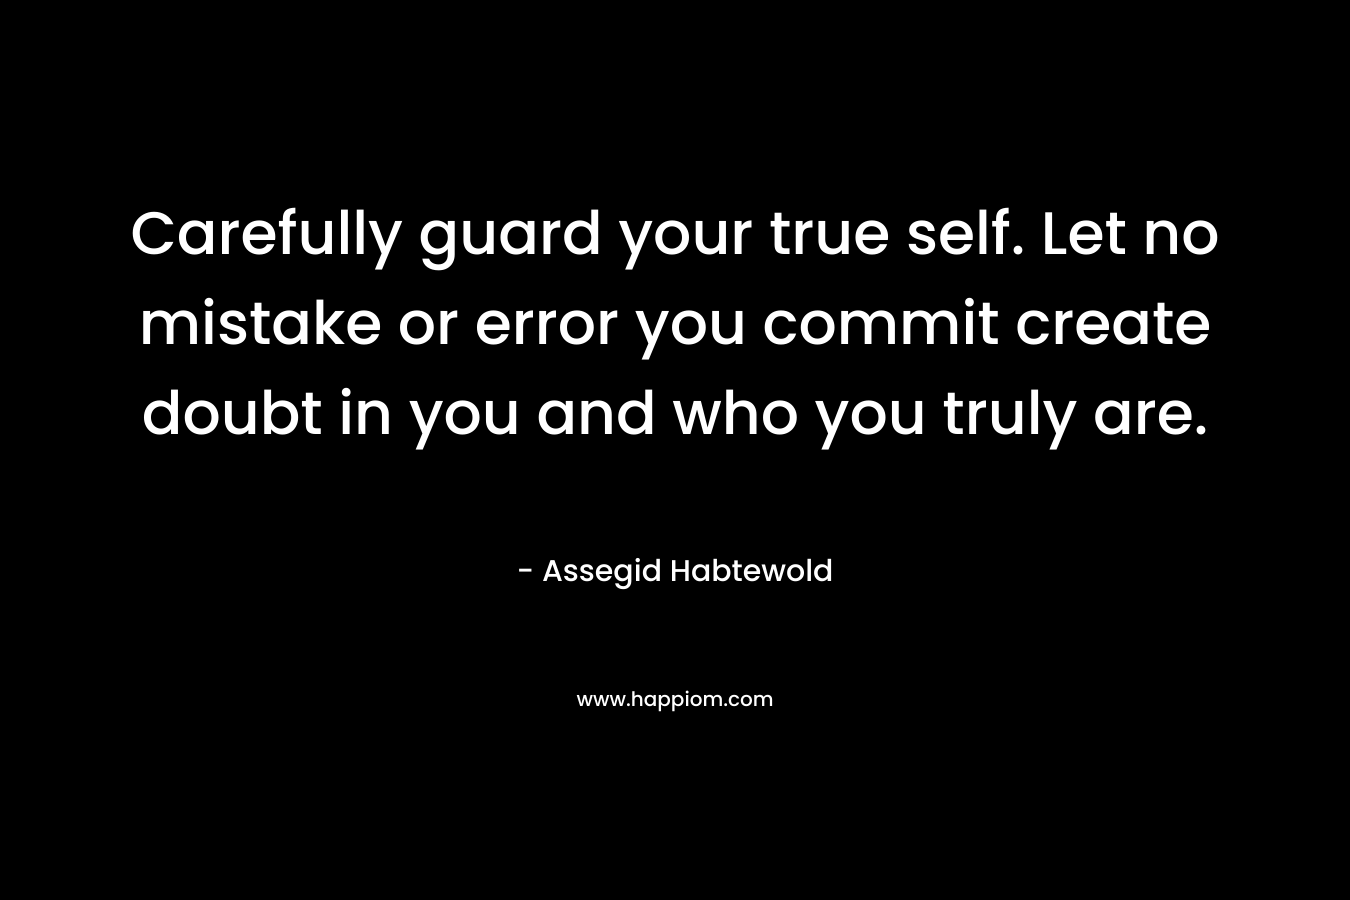 Carefully guard your true self. Let no mistake or error you commit create doubt in you and who you truly are. – Assegid Habtewold